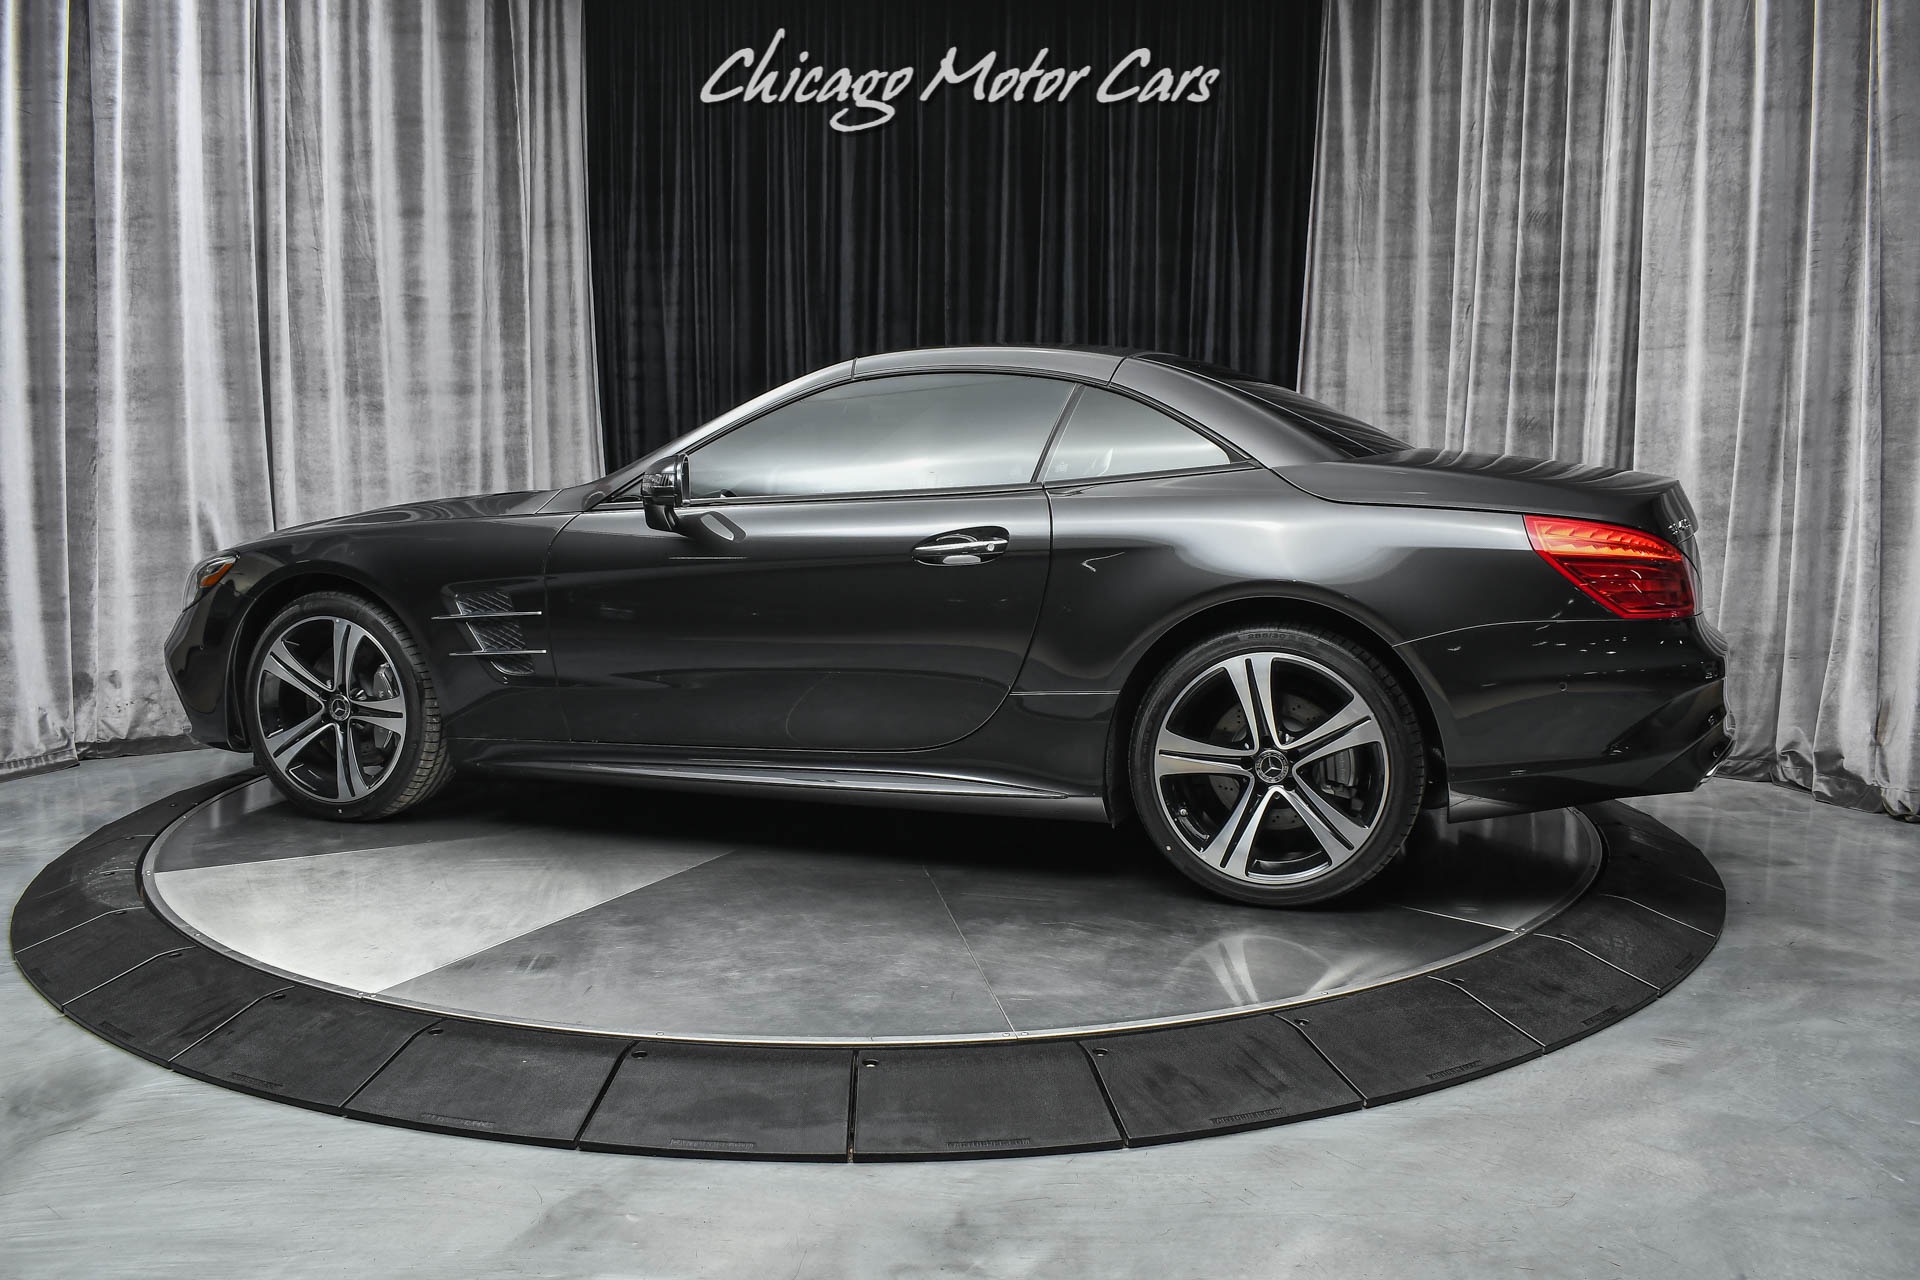 Used-2020-Mercedes-Benz-SL450-Premium-Package-Intelligent-Drive-Package-LOW-Miles